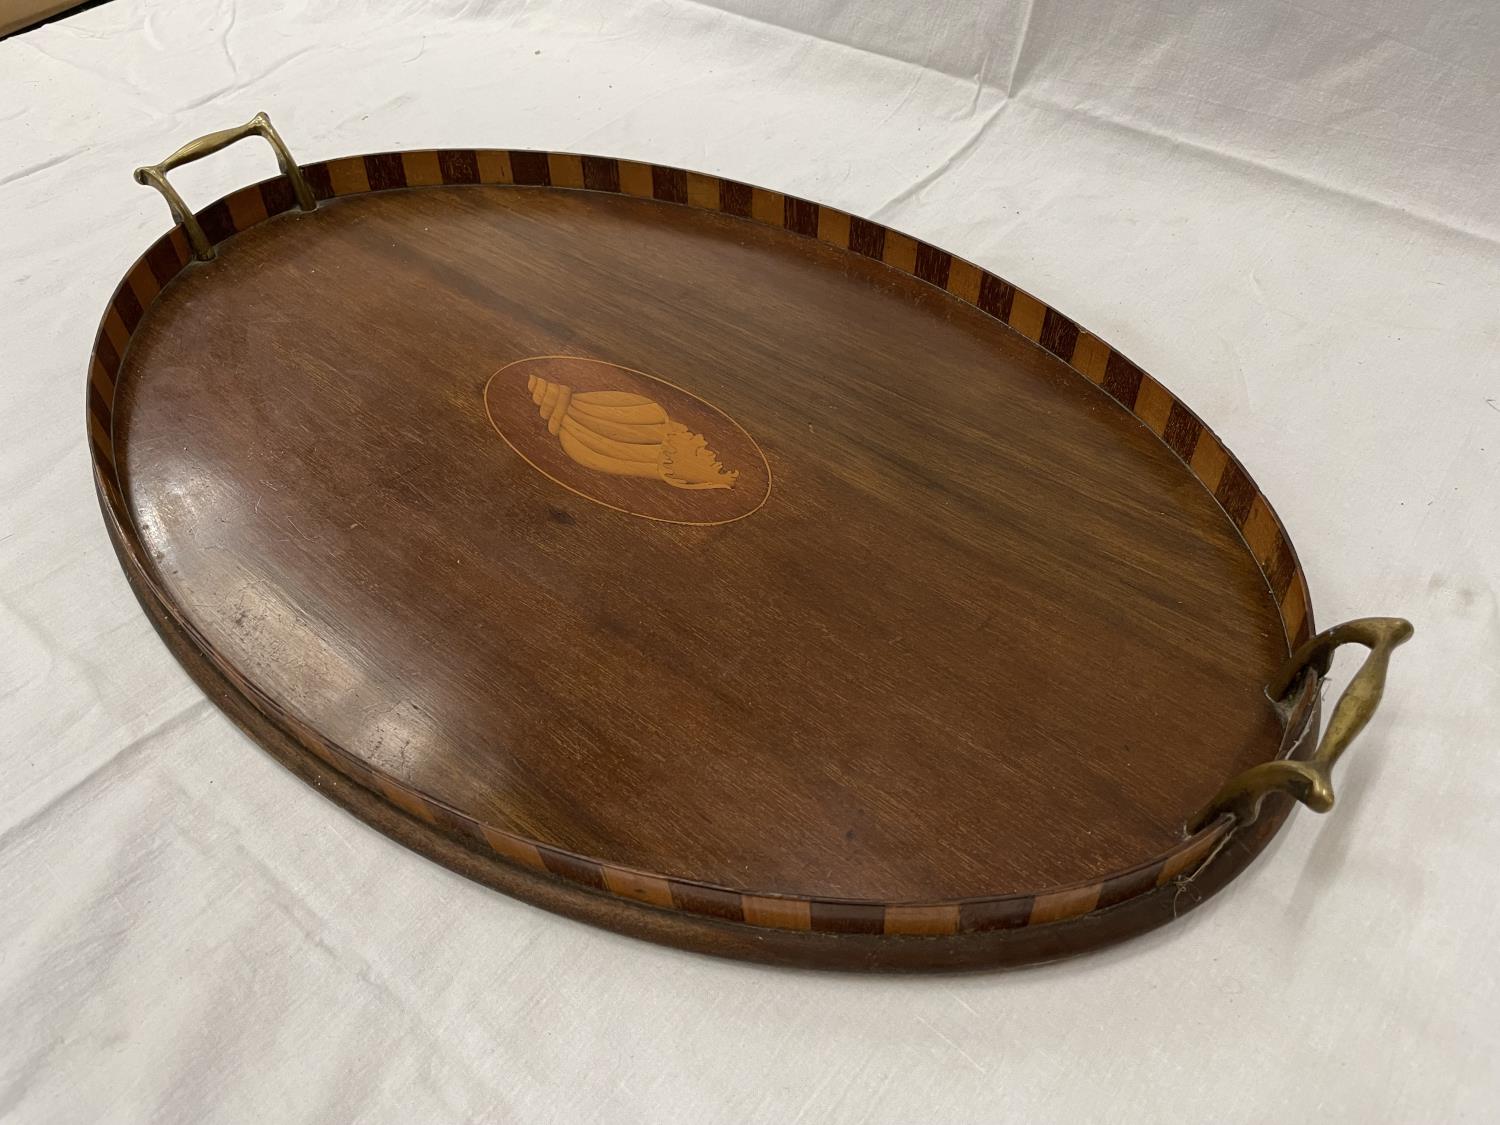 A LARGE MAHOGANY TRAY WITH BRASS HANDLES AND A SHELL DESIGN 57CM X 37CM - Image 2 of 3